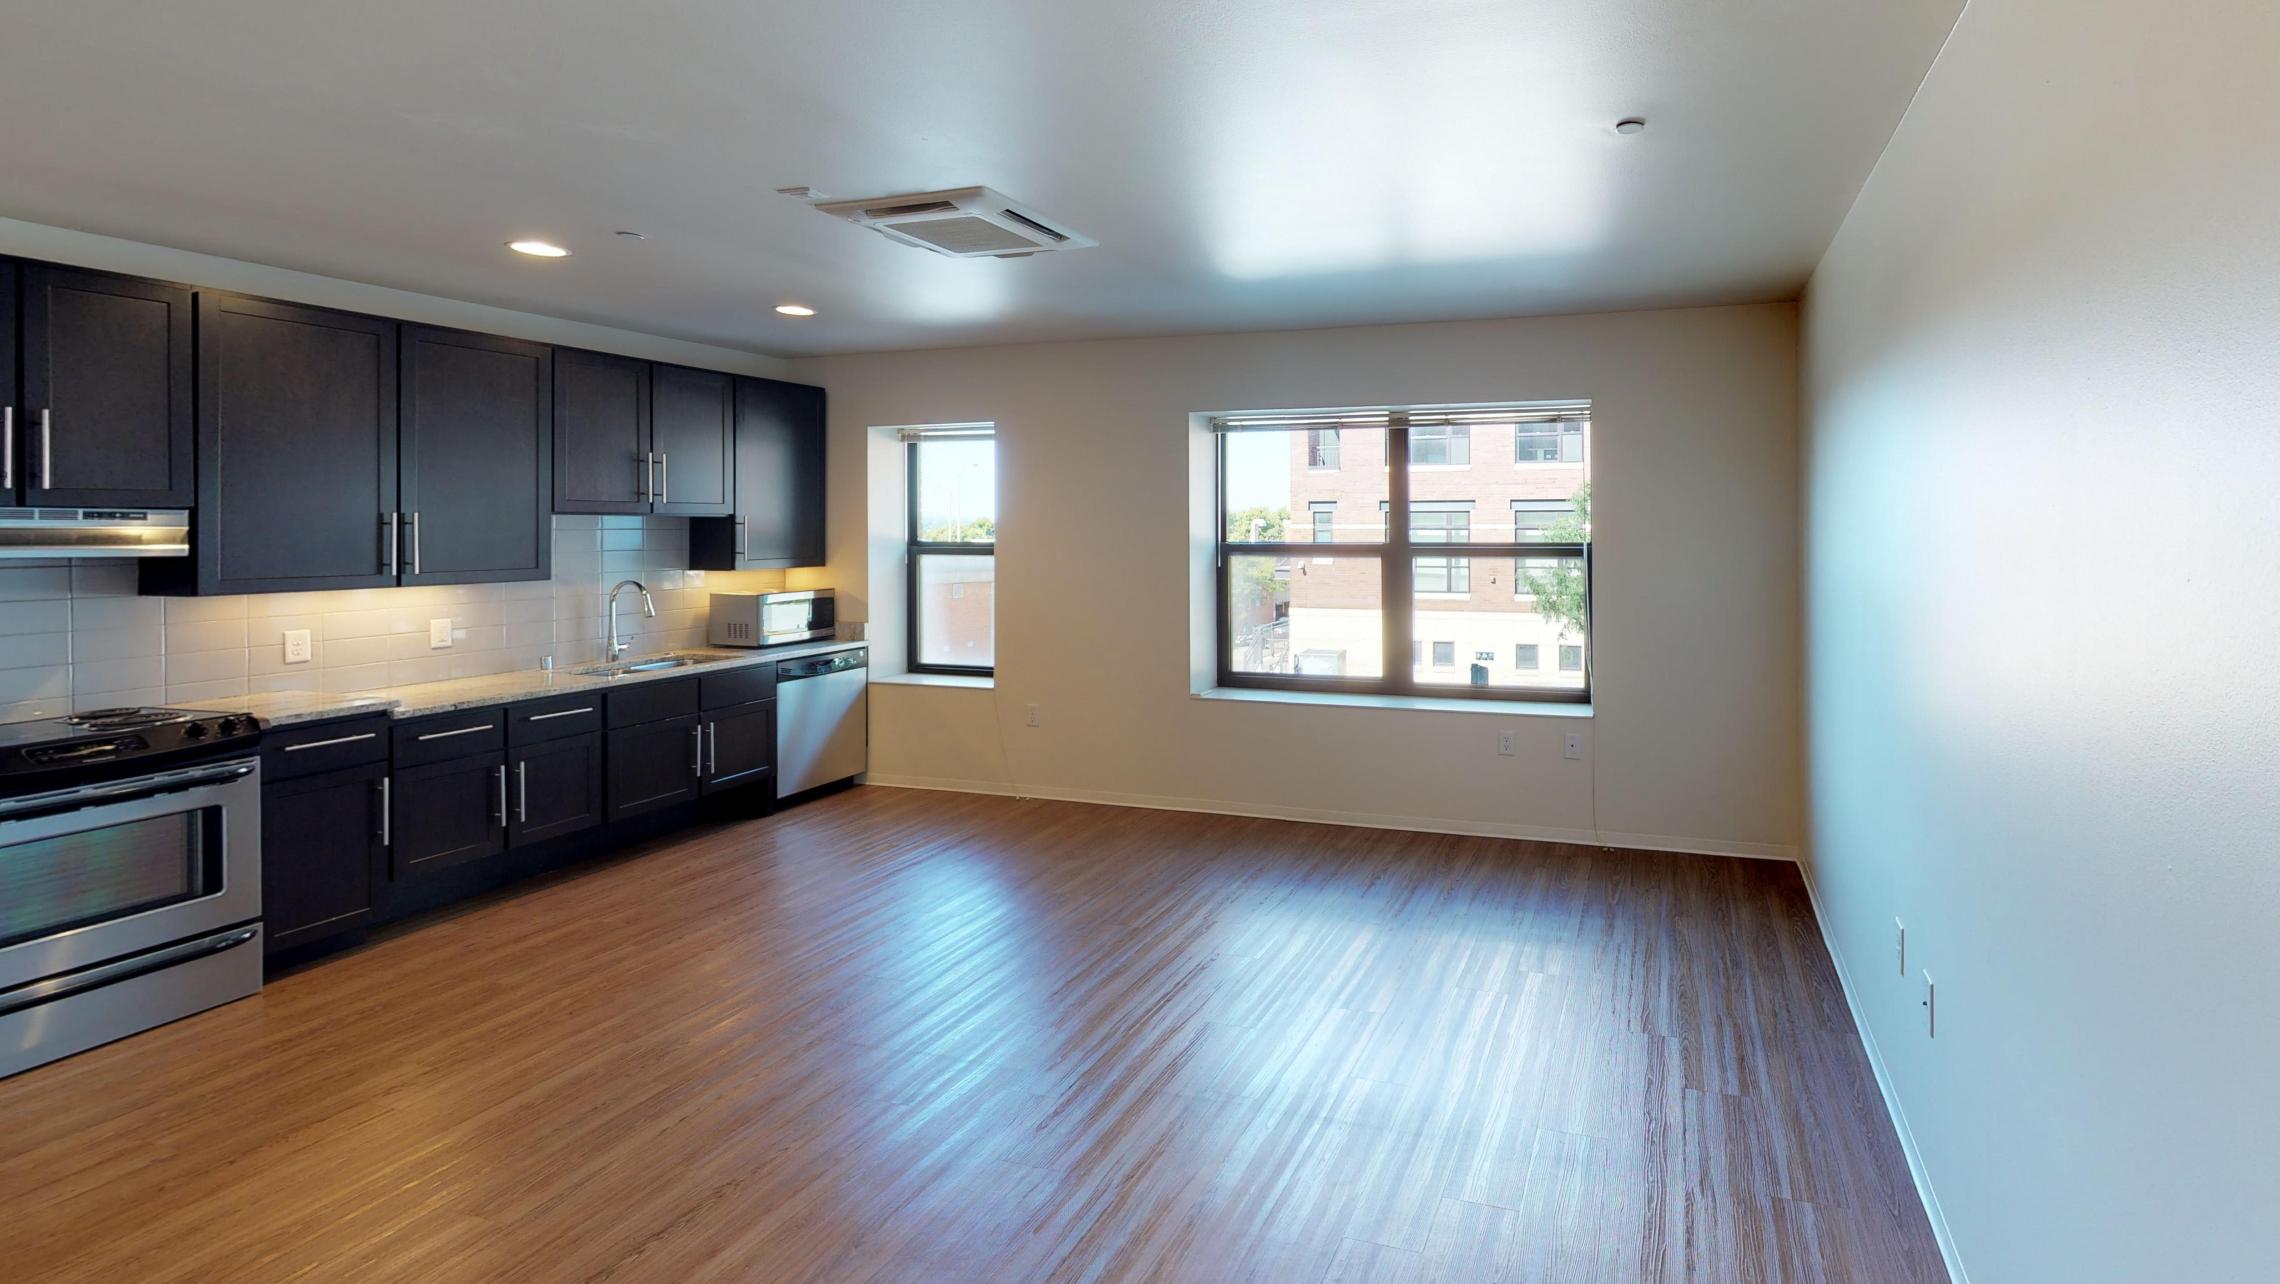 Capitol-Hill-Apartment-203-One-Bedroom-ADA-Corner-Downtown-Madison-Capitol-Square-Upscale-Luxury-Modern-Lifestyle-Views-Lake-Cats-Living-Bathroom-Kithcen-Laundry